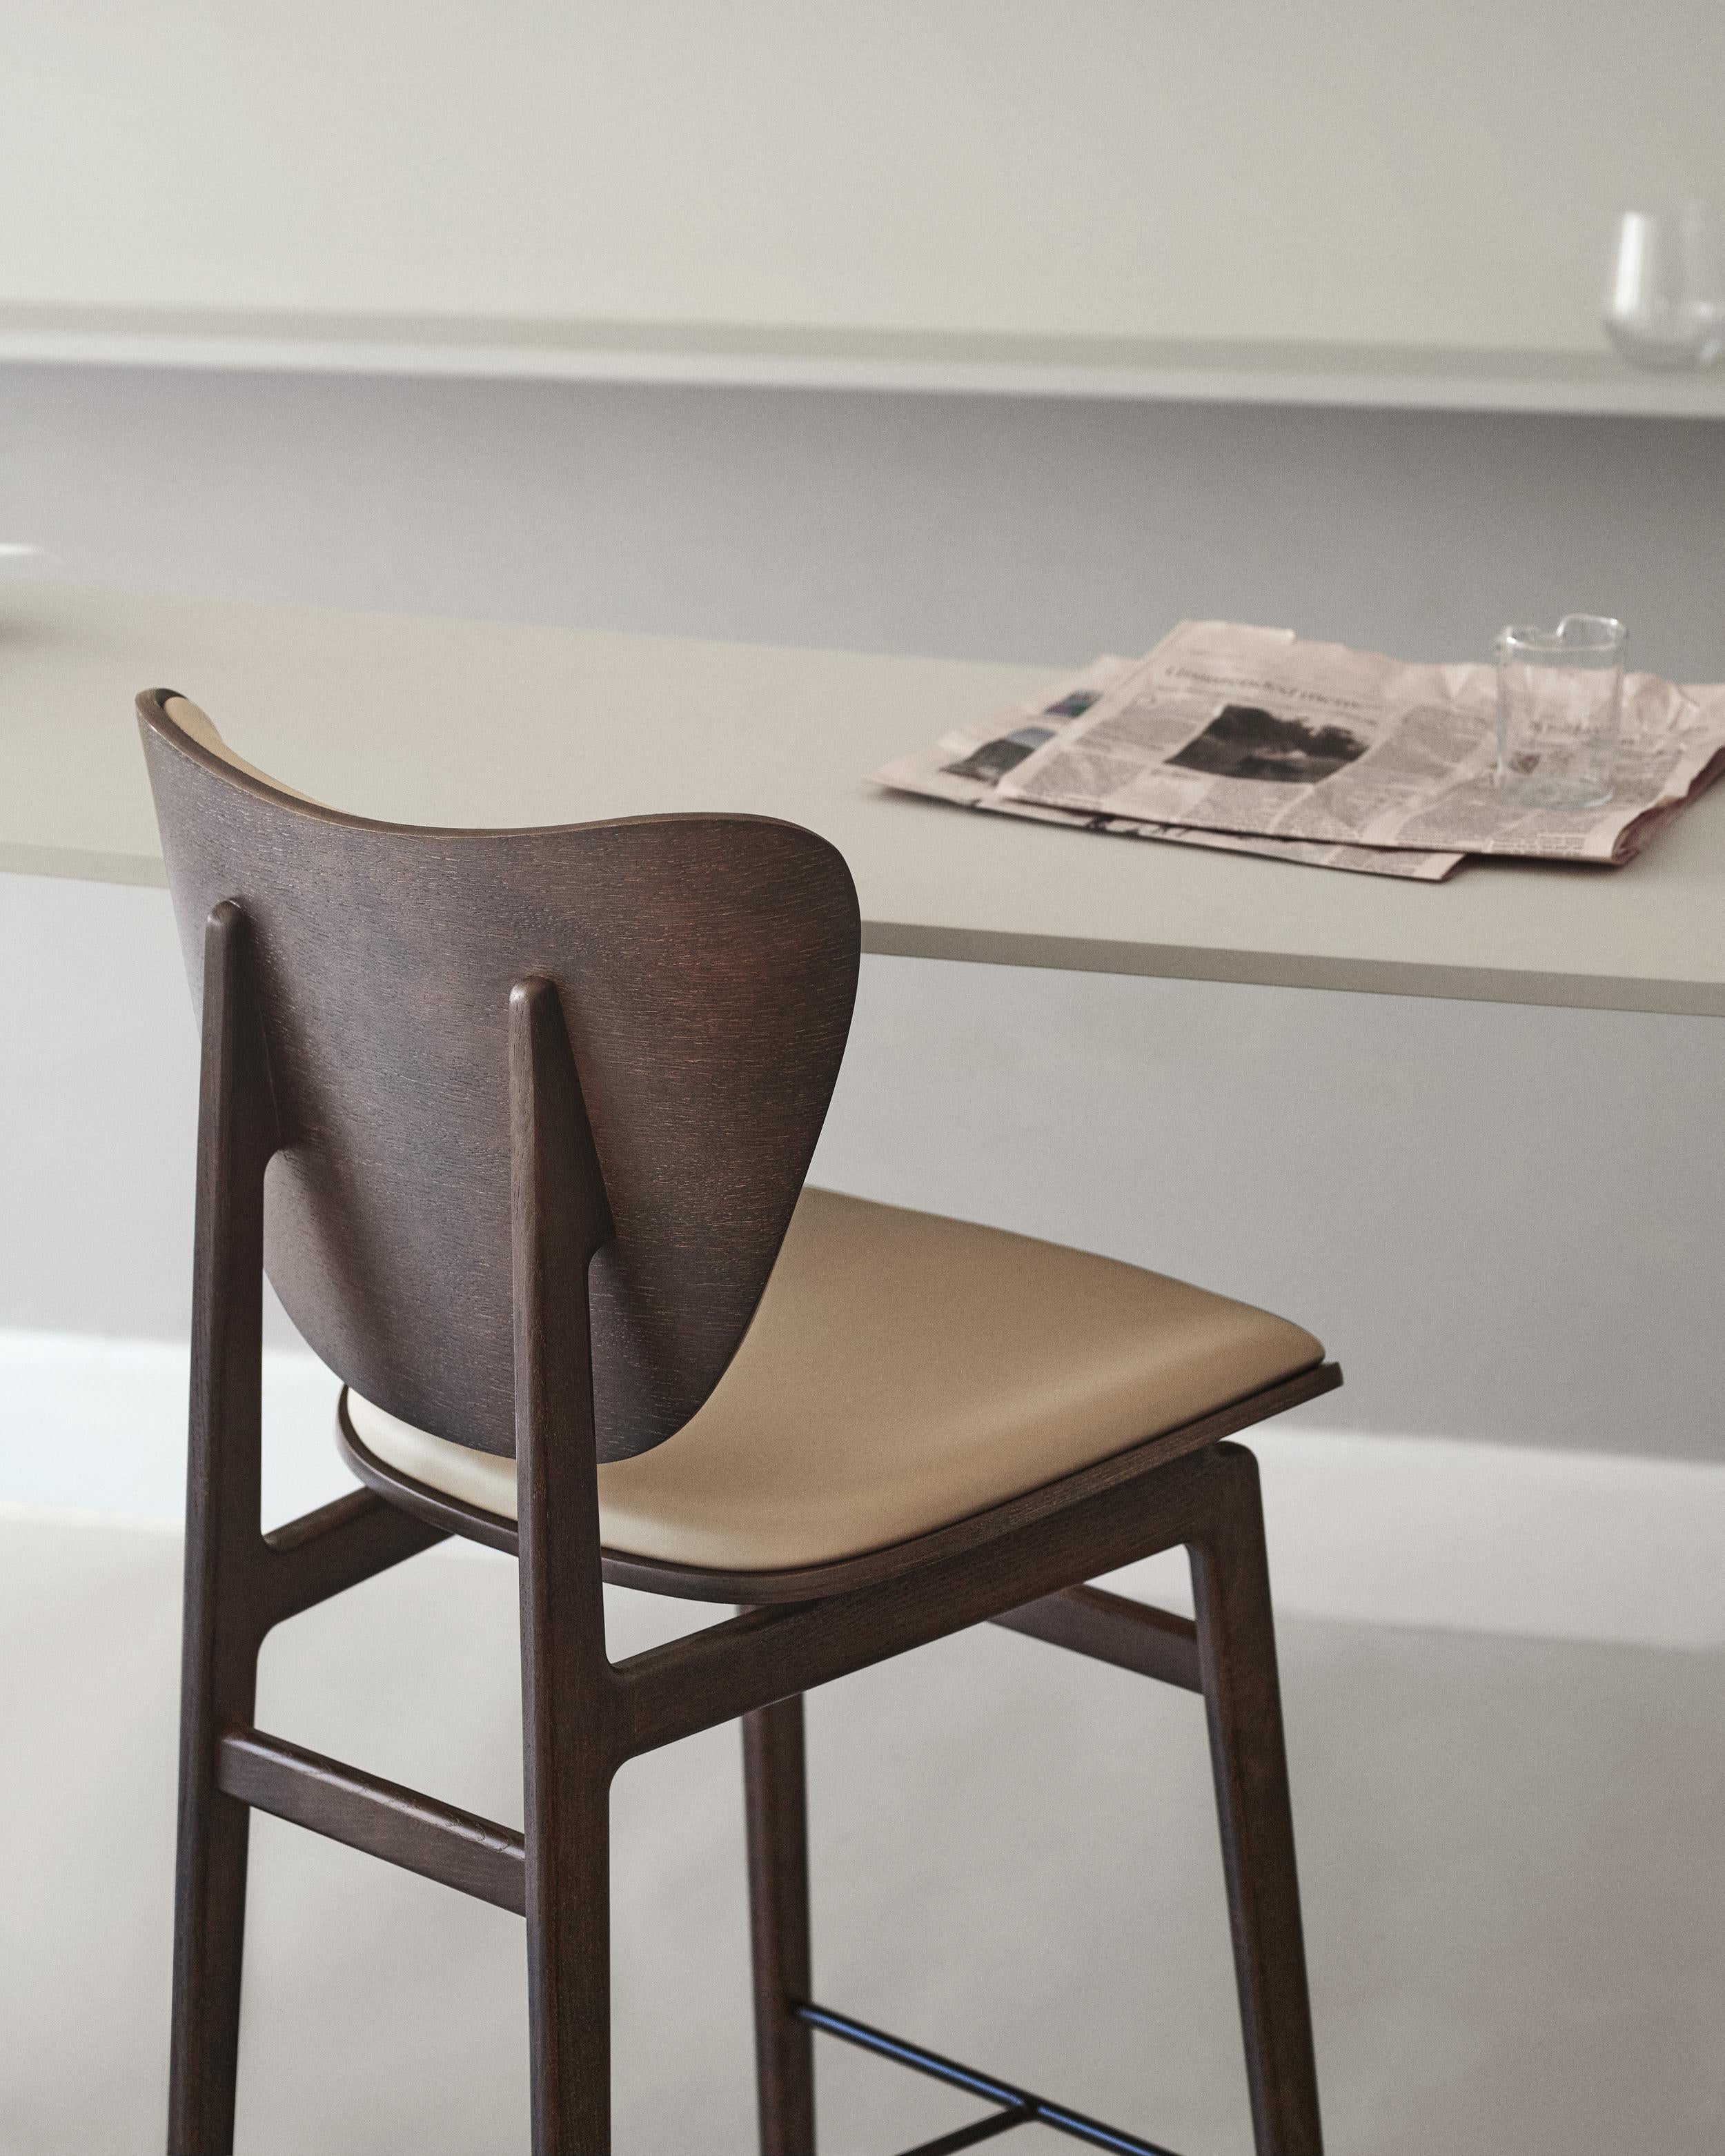 Elephant Bar Chair 75 by NORR11
Dimensions: D 46 x W 53 x H 111 cm. SH: 75/78,5 cm.
Materials: Natural oak, steel and upholstery.
Upholstery: Dunes Camel 21004. 

Available in different oak finishes: Natural oak, light smoked oak, dark smoked oak,